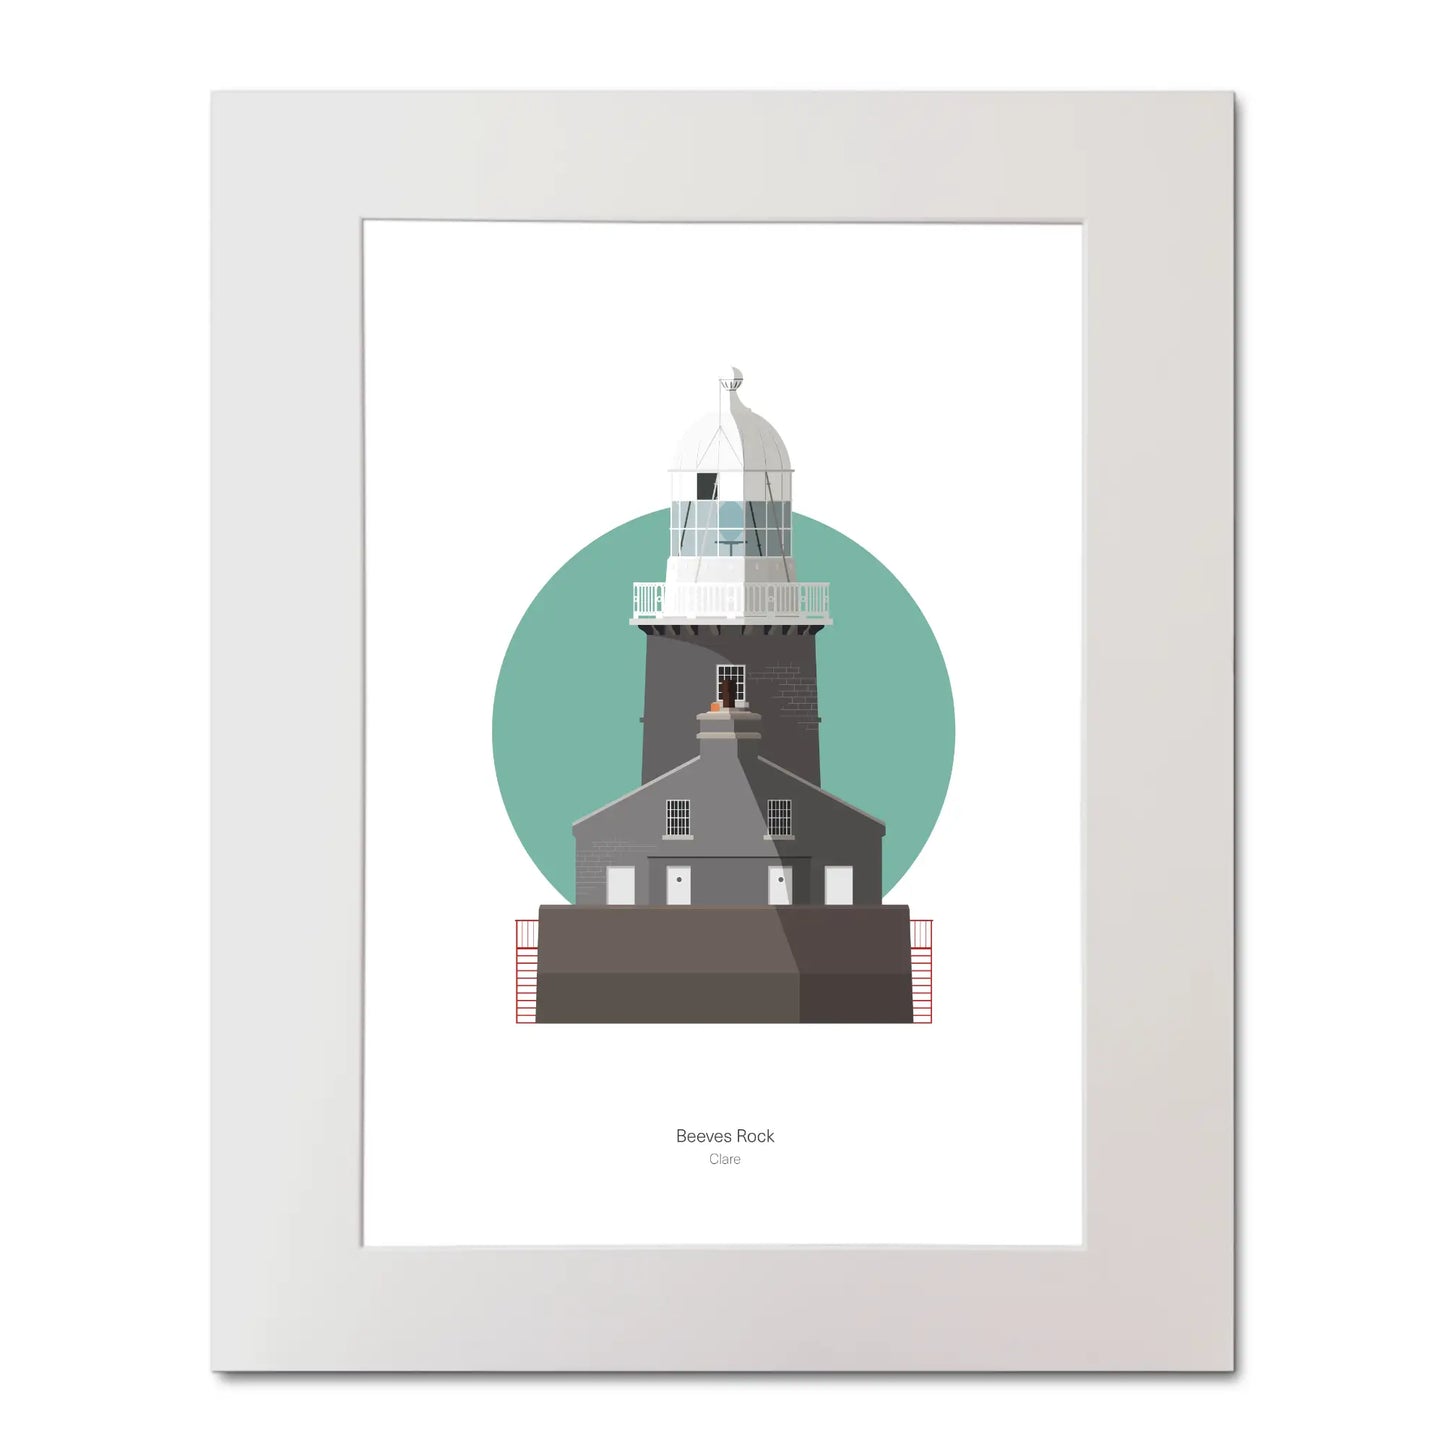 Illustration of Beeves Rock lighthouse on a white background inside light blue square, mounted and measuring 40x50cm.